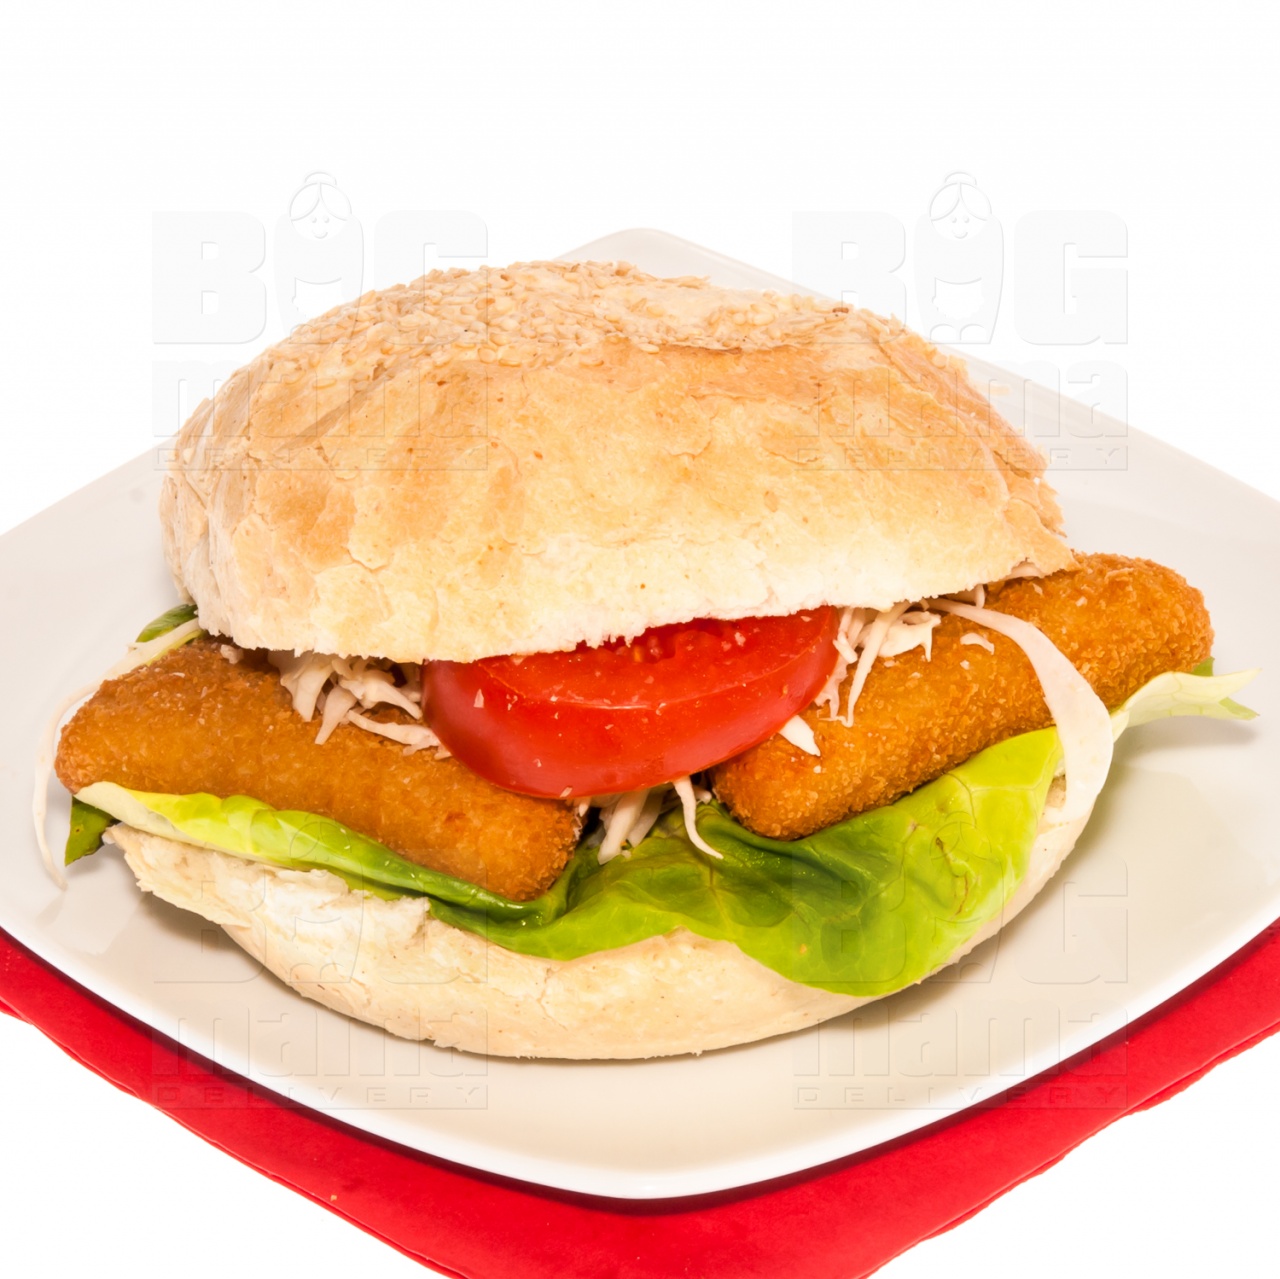 Product #145 image - Small breaded cheese sandwich